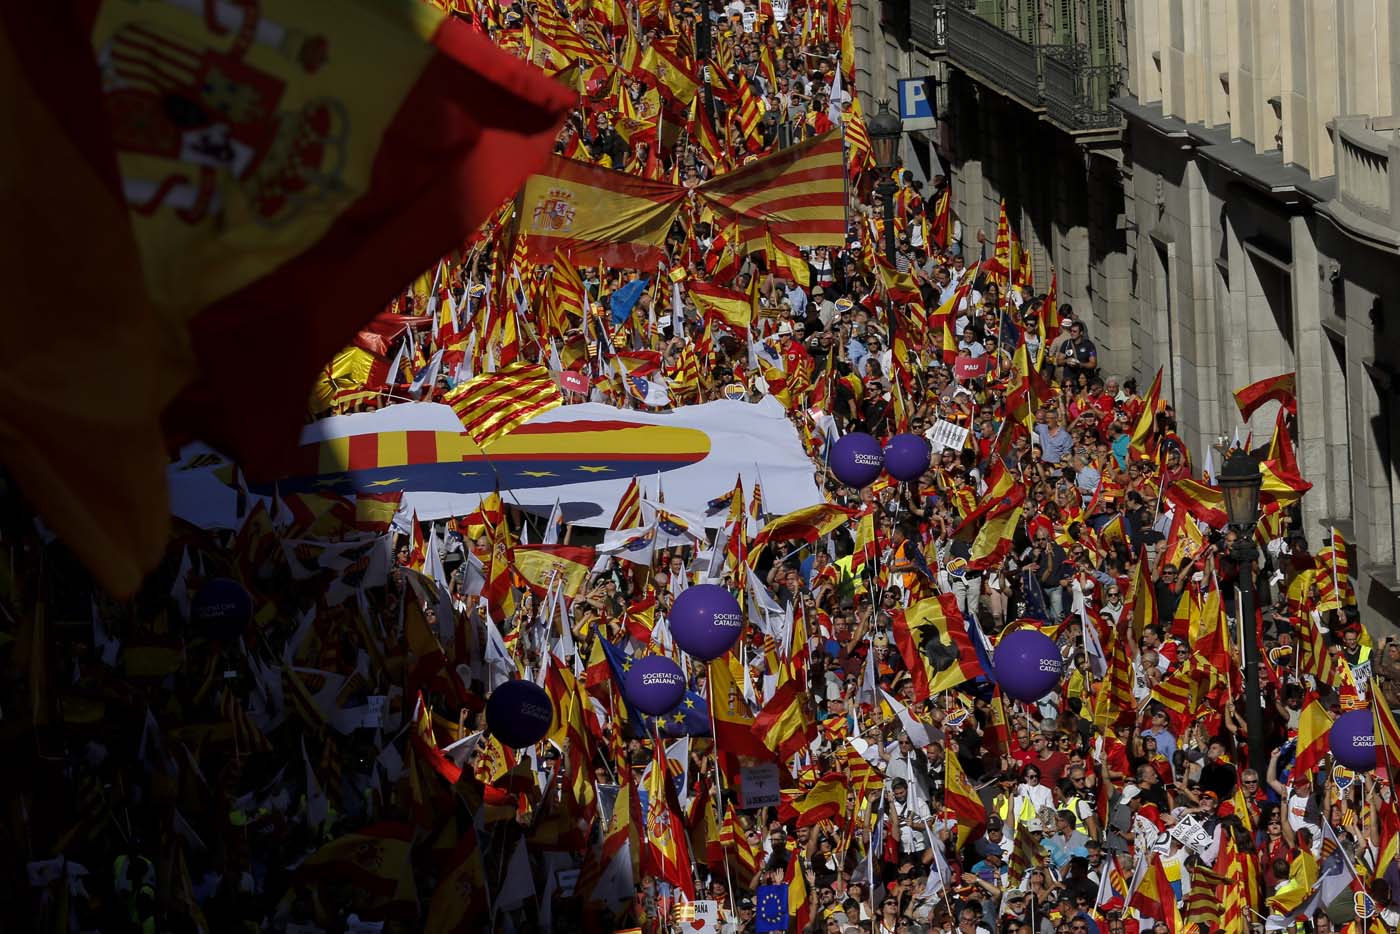 Protesters hold Spanish flags during a demonstration called by "Societat Civil Catalana" (Catalan Civil Society) to support the unity of Spain on October 8, 2017 in Barcelona. Spain braced for more protests despite tentative signs that the sides may be seeking to defuse the crisis after Madrid offered a first apology to Catalans injured by police during their outlawed independence vote. / AFP PHOTO / PAU BARRENA